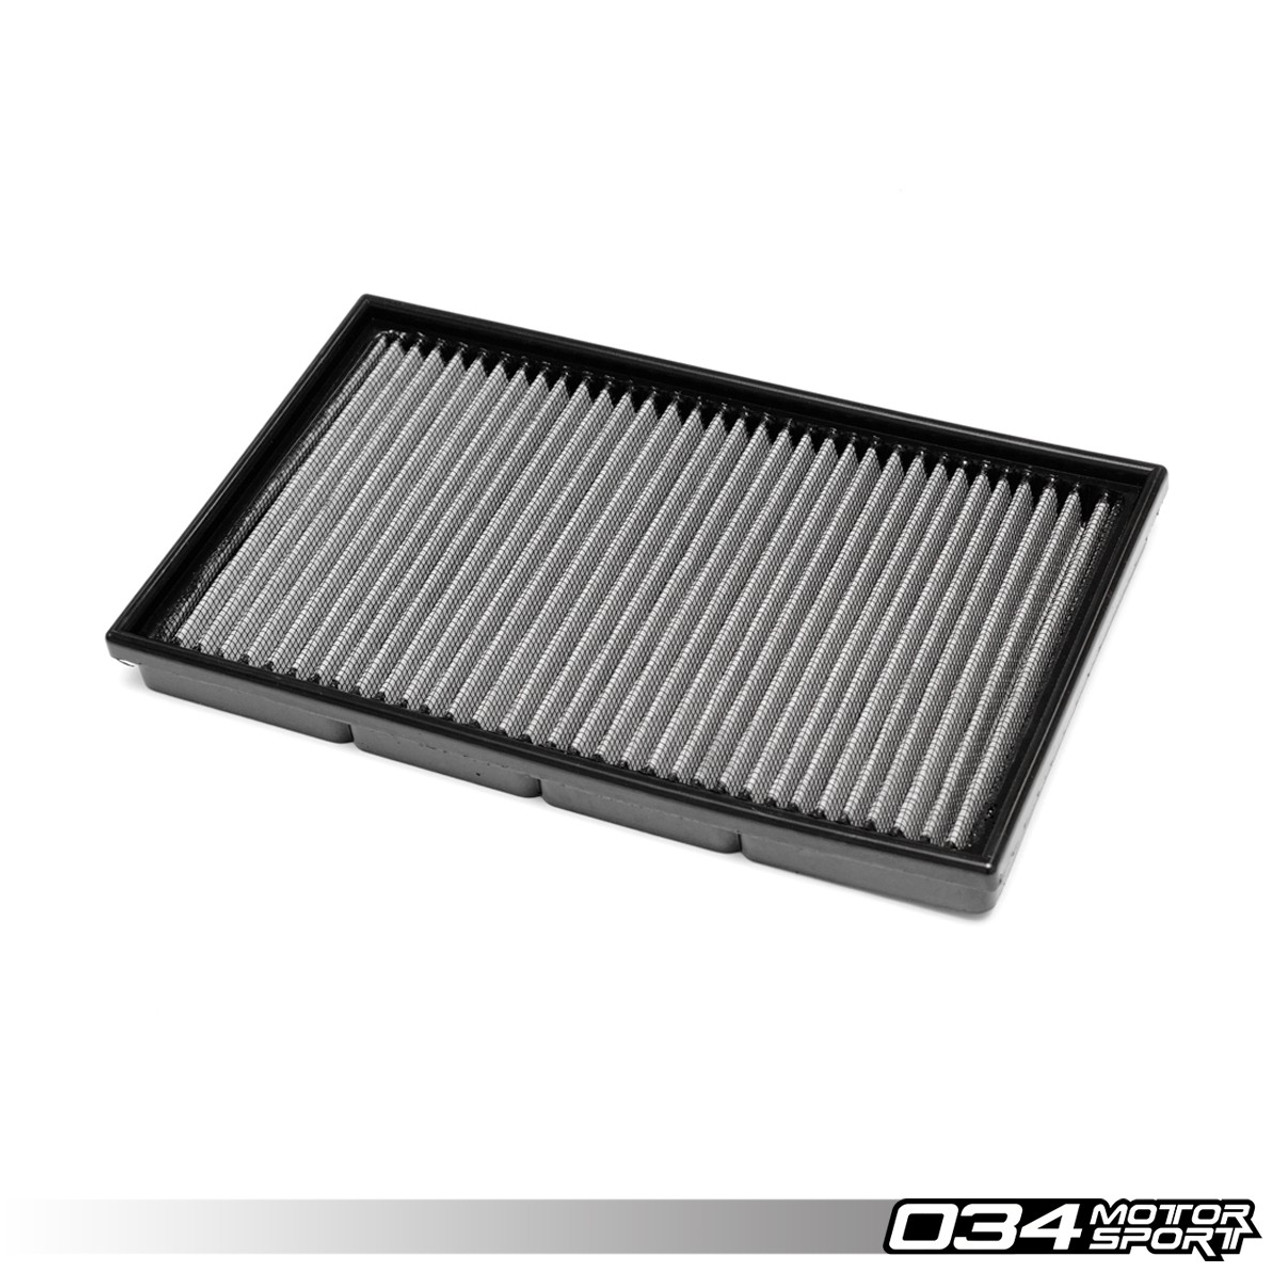 034Motorsport Performance Drop-In Air Filter for 1.8T & 2.0T MQB